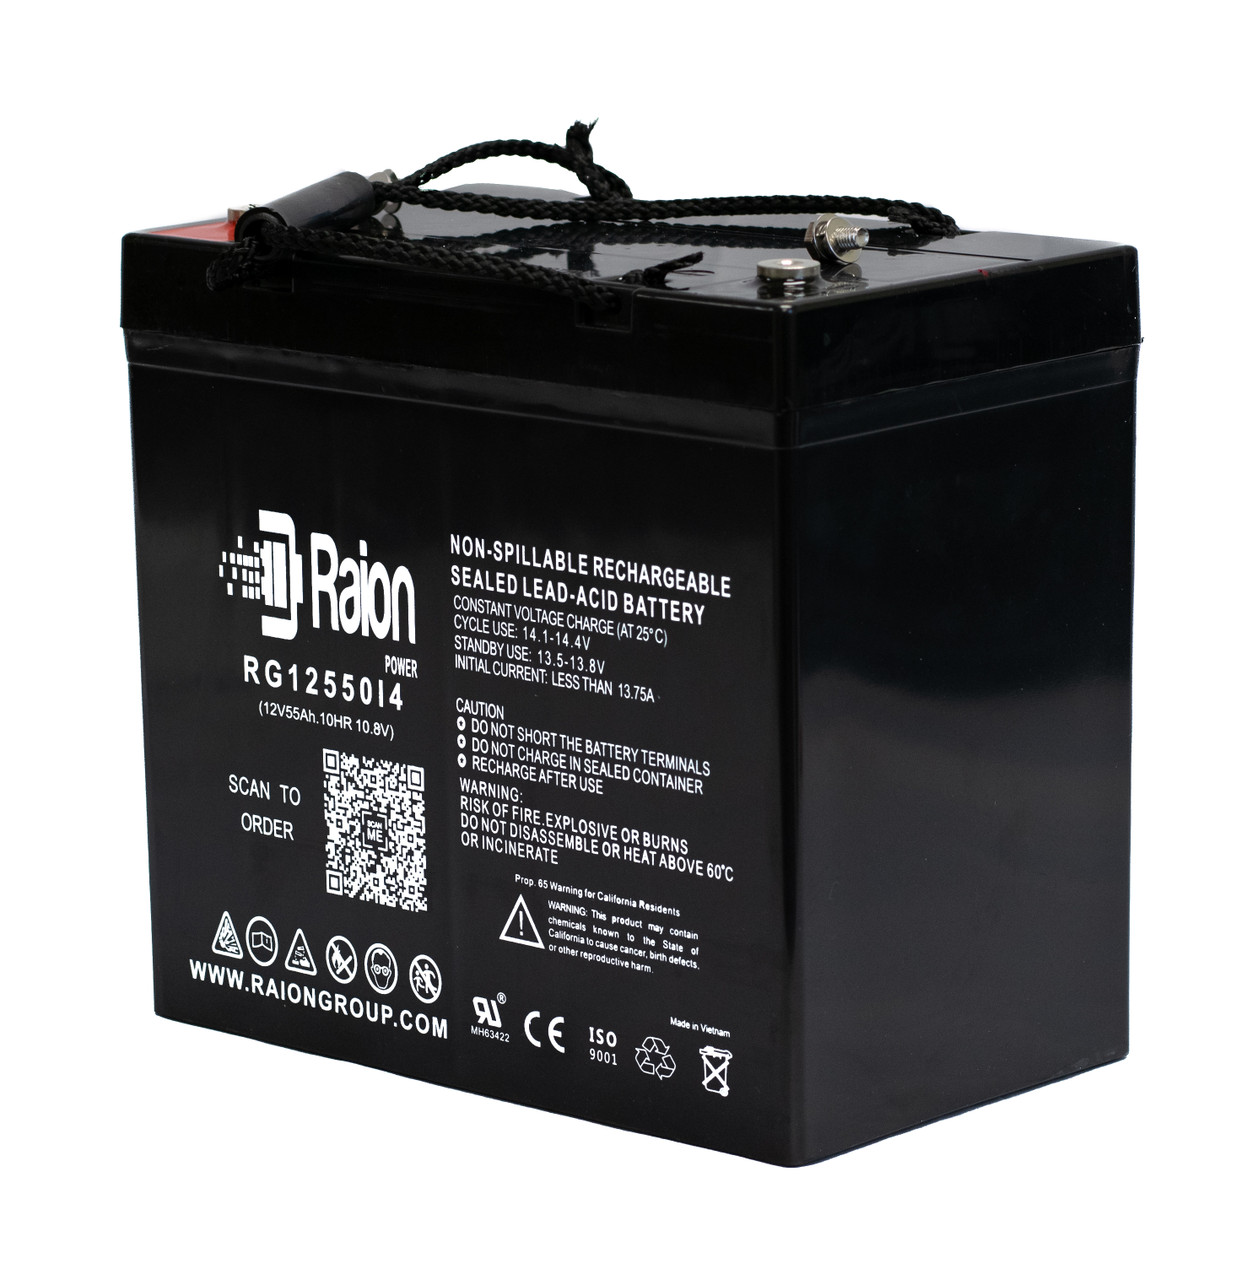 Raion Power 12V 55Ah 22NF Mobility Scooter Battery Replacement for Everest & Jennings Sprint Plus ES